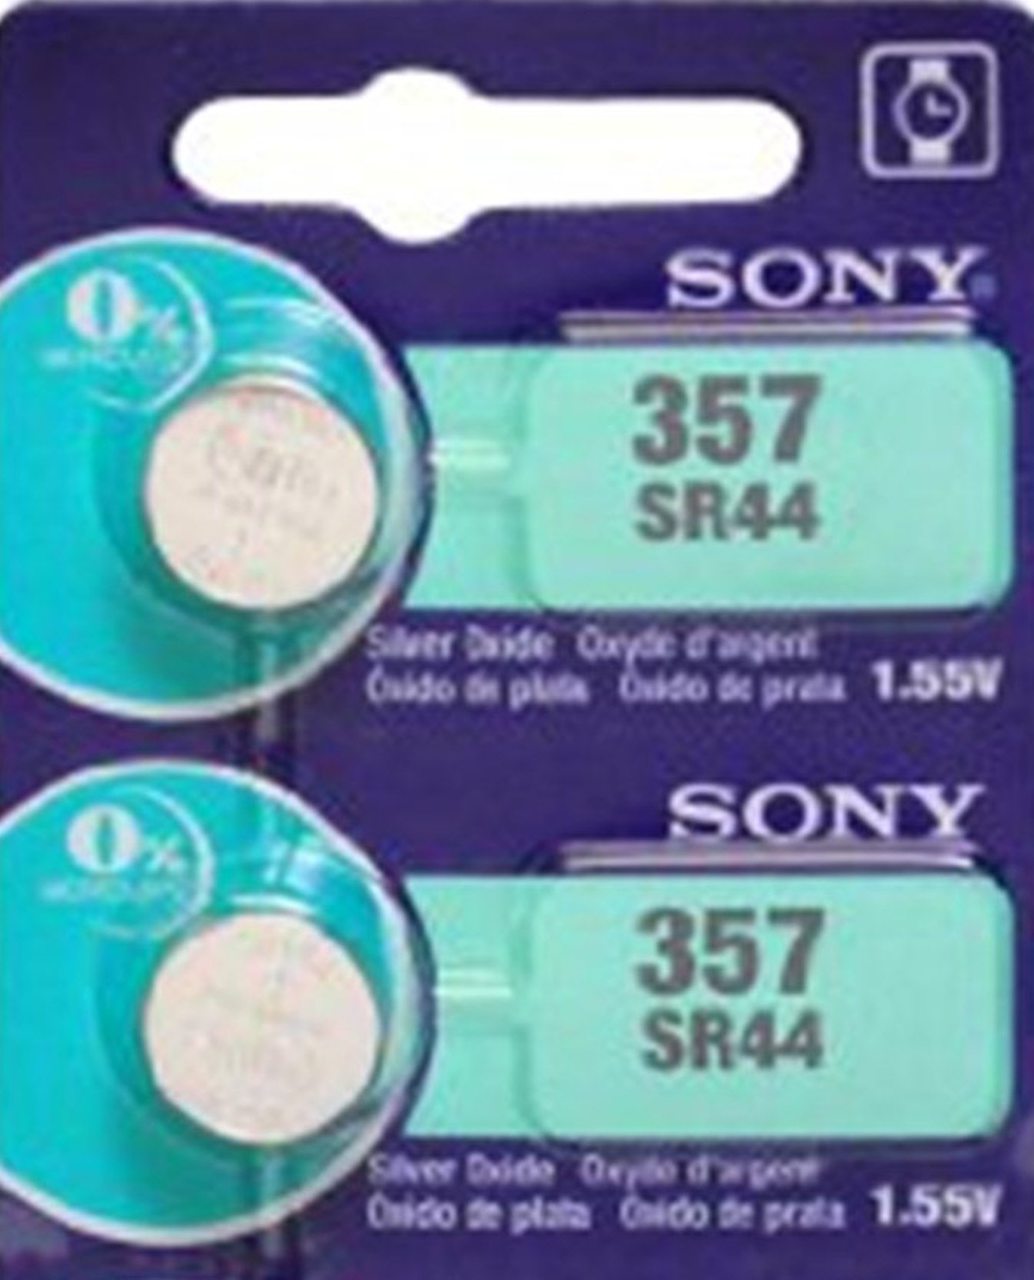 Sony 357/303 - SR44 Silver Oxide Button Battery 1.55V - 2 Pack + FREE SHIPPING!